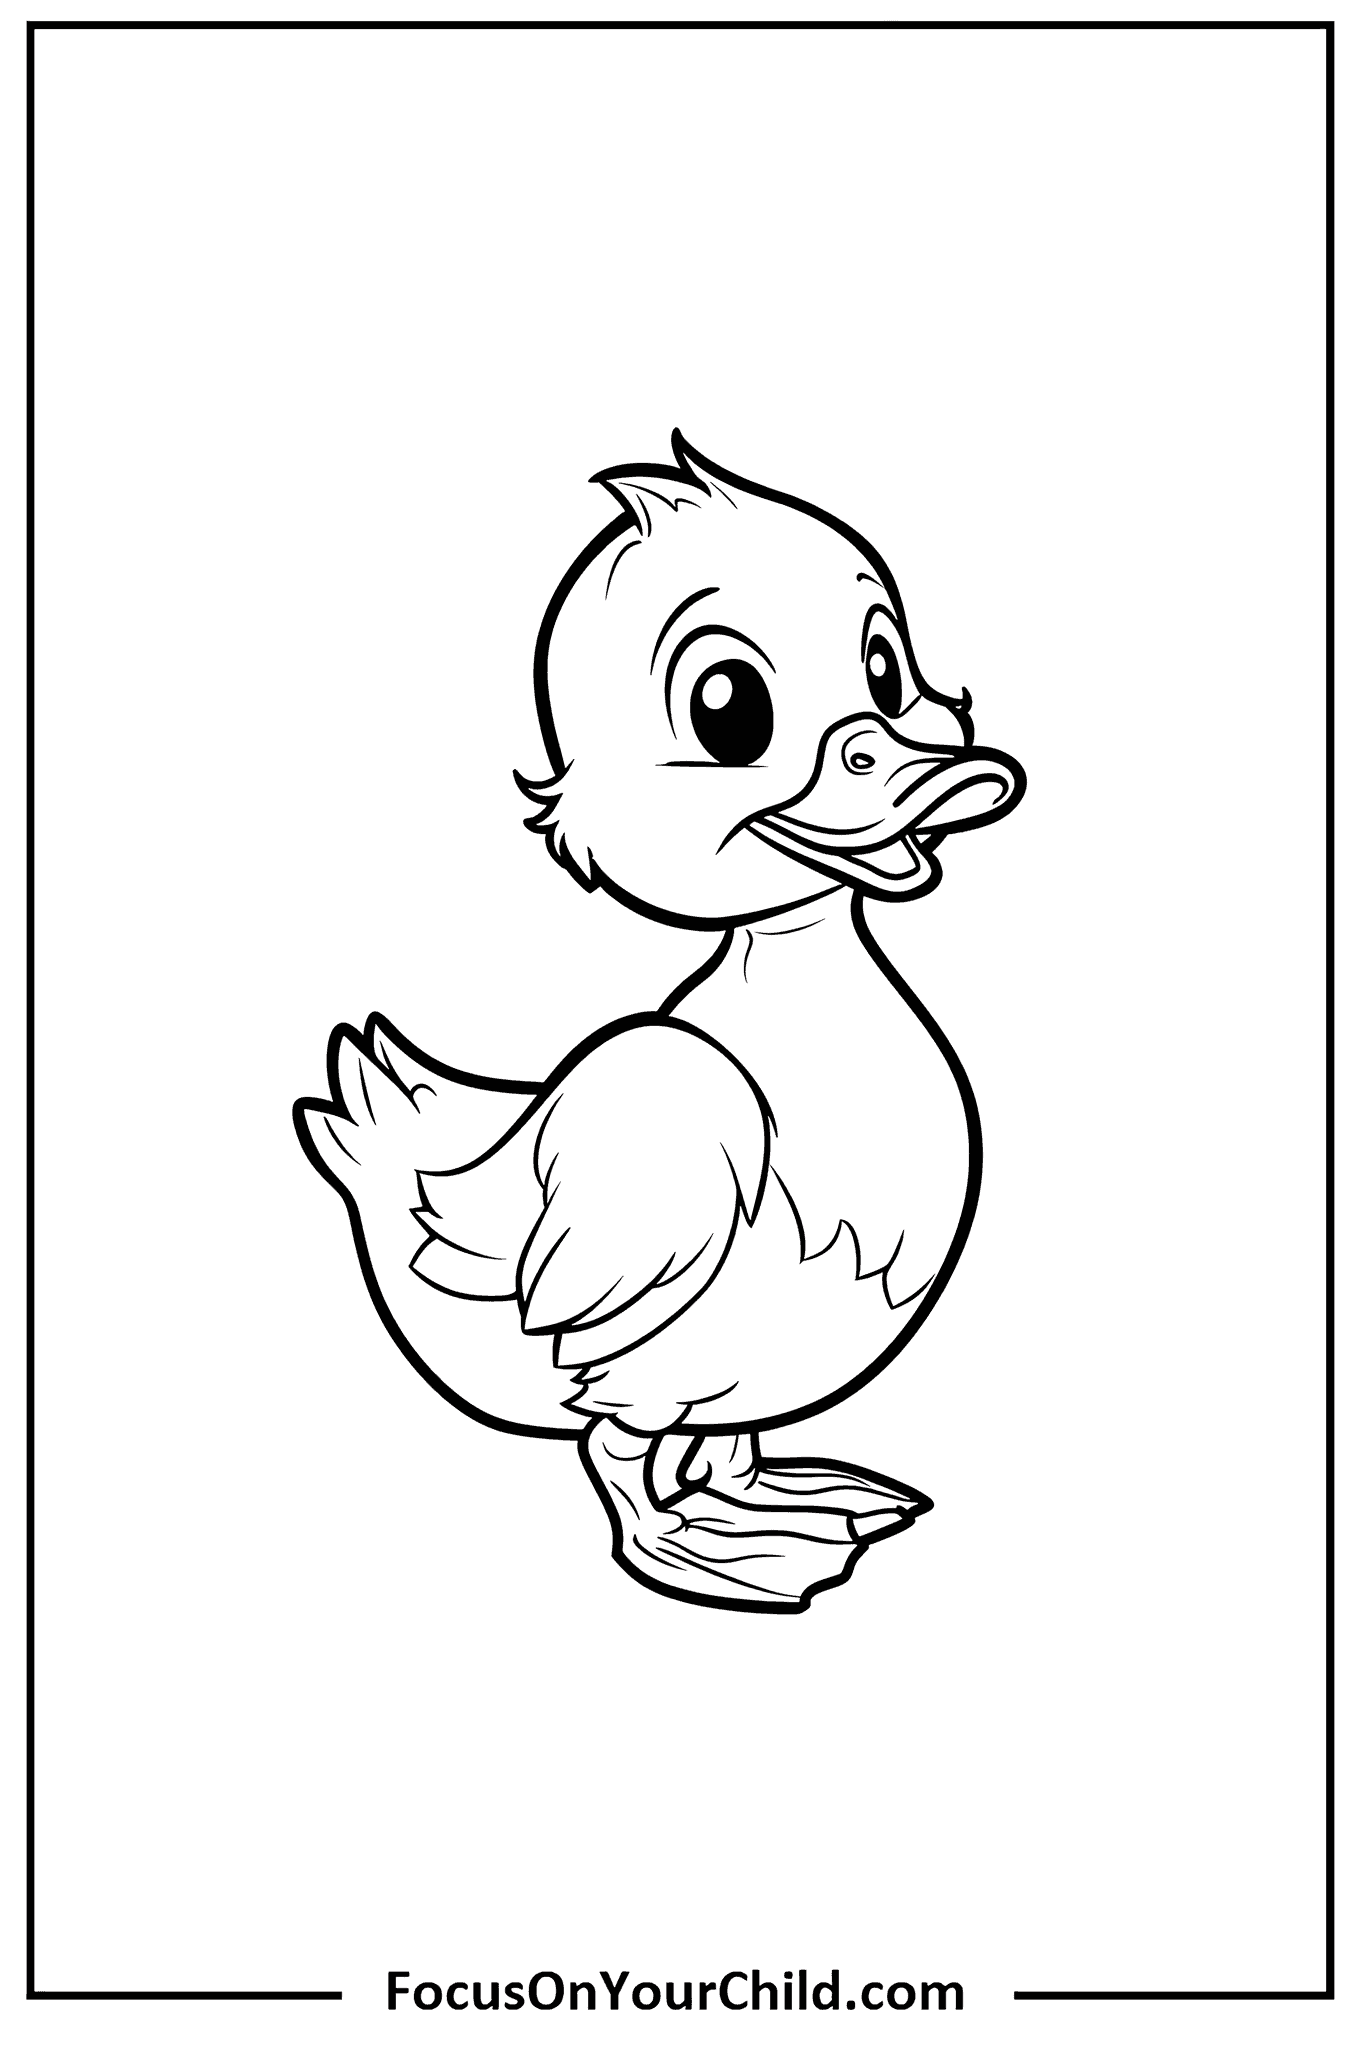 Adorable cartoon duckling drawing for coloring from FocusOnYourChild.com.